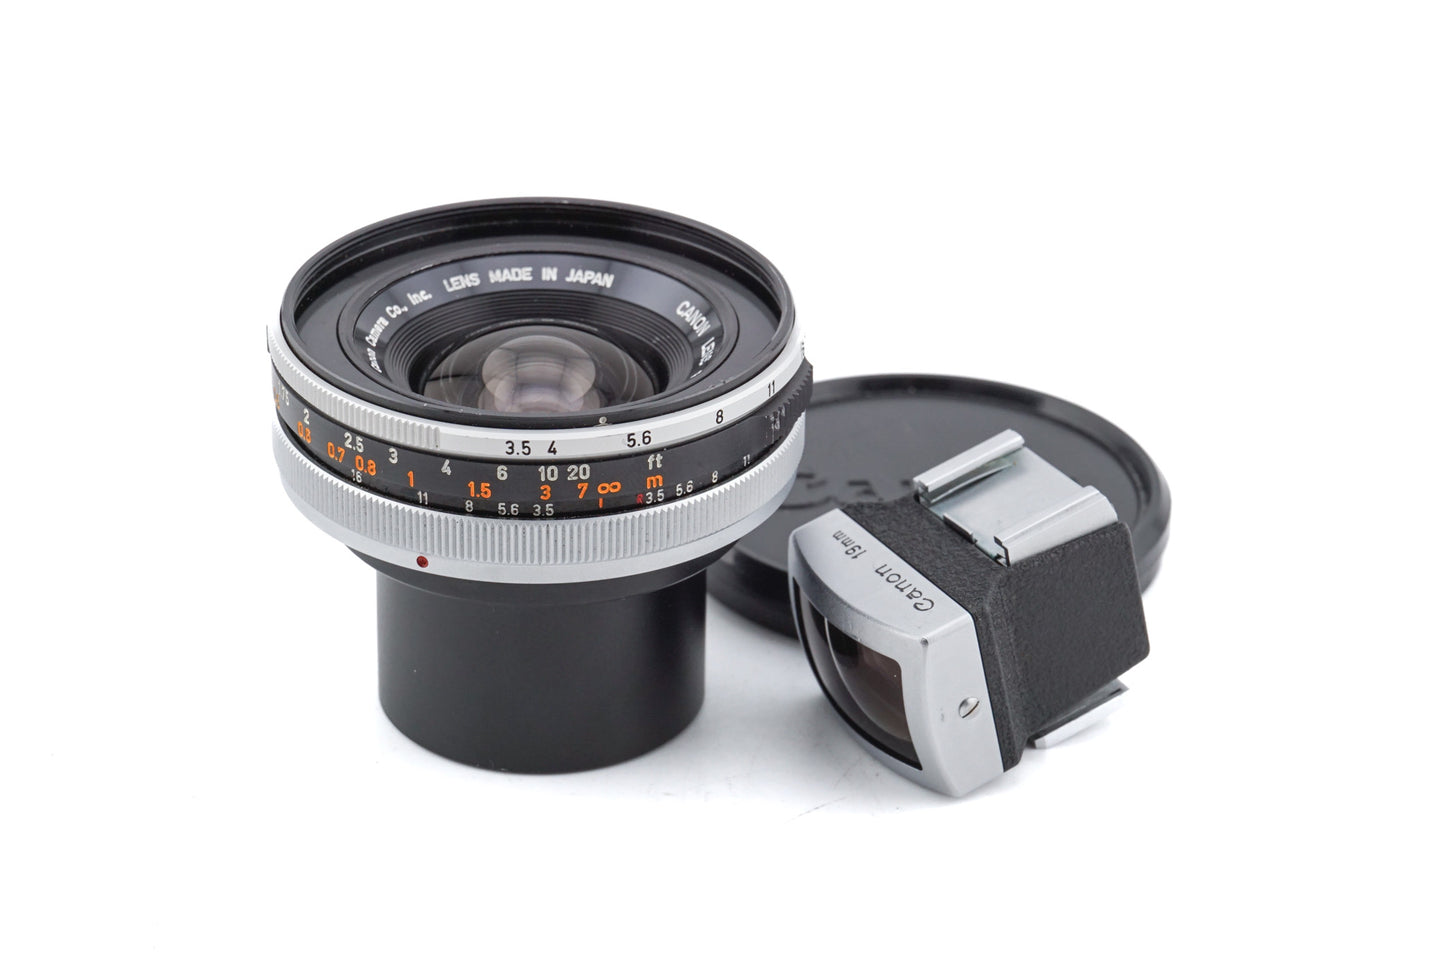 Canon 19mm f3.5 FL + 19mm Optical Viewfinder